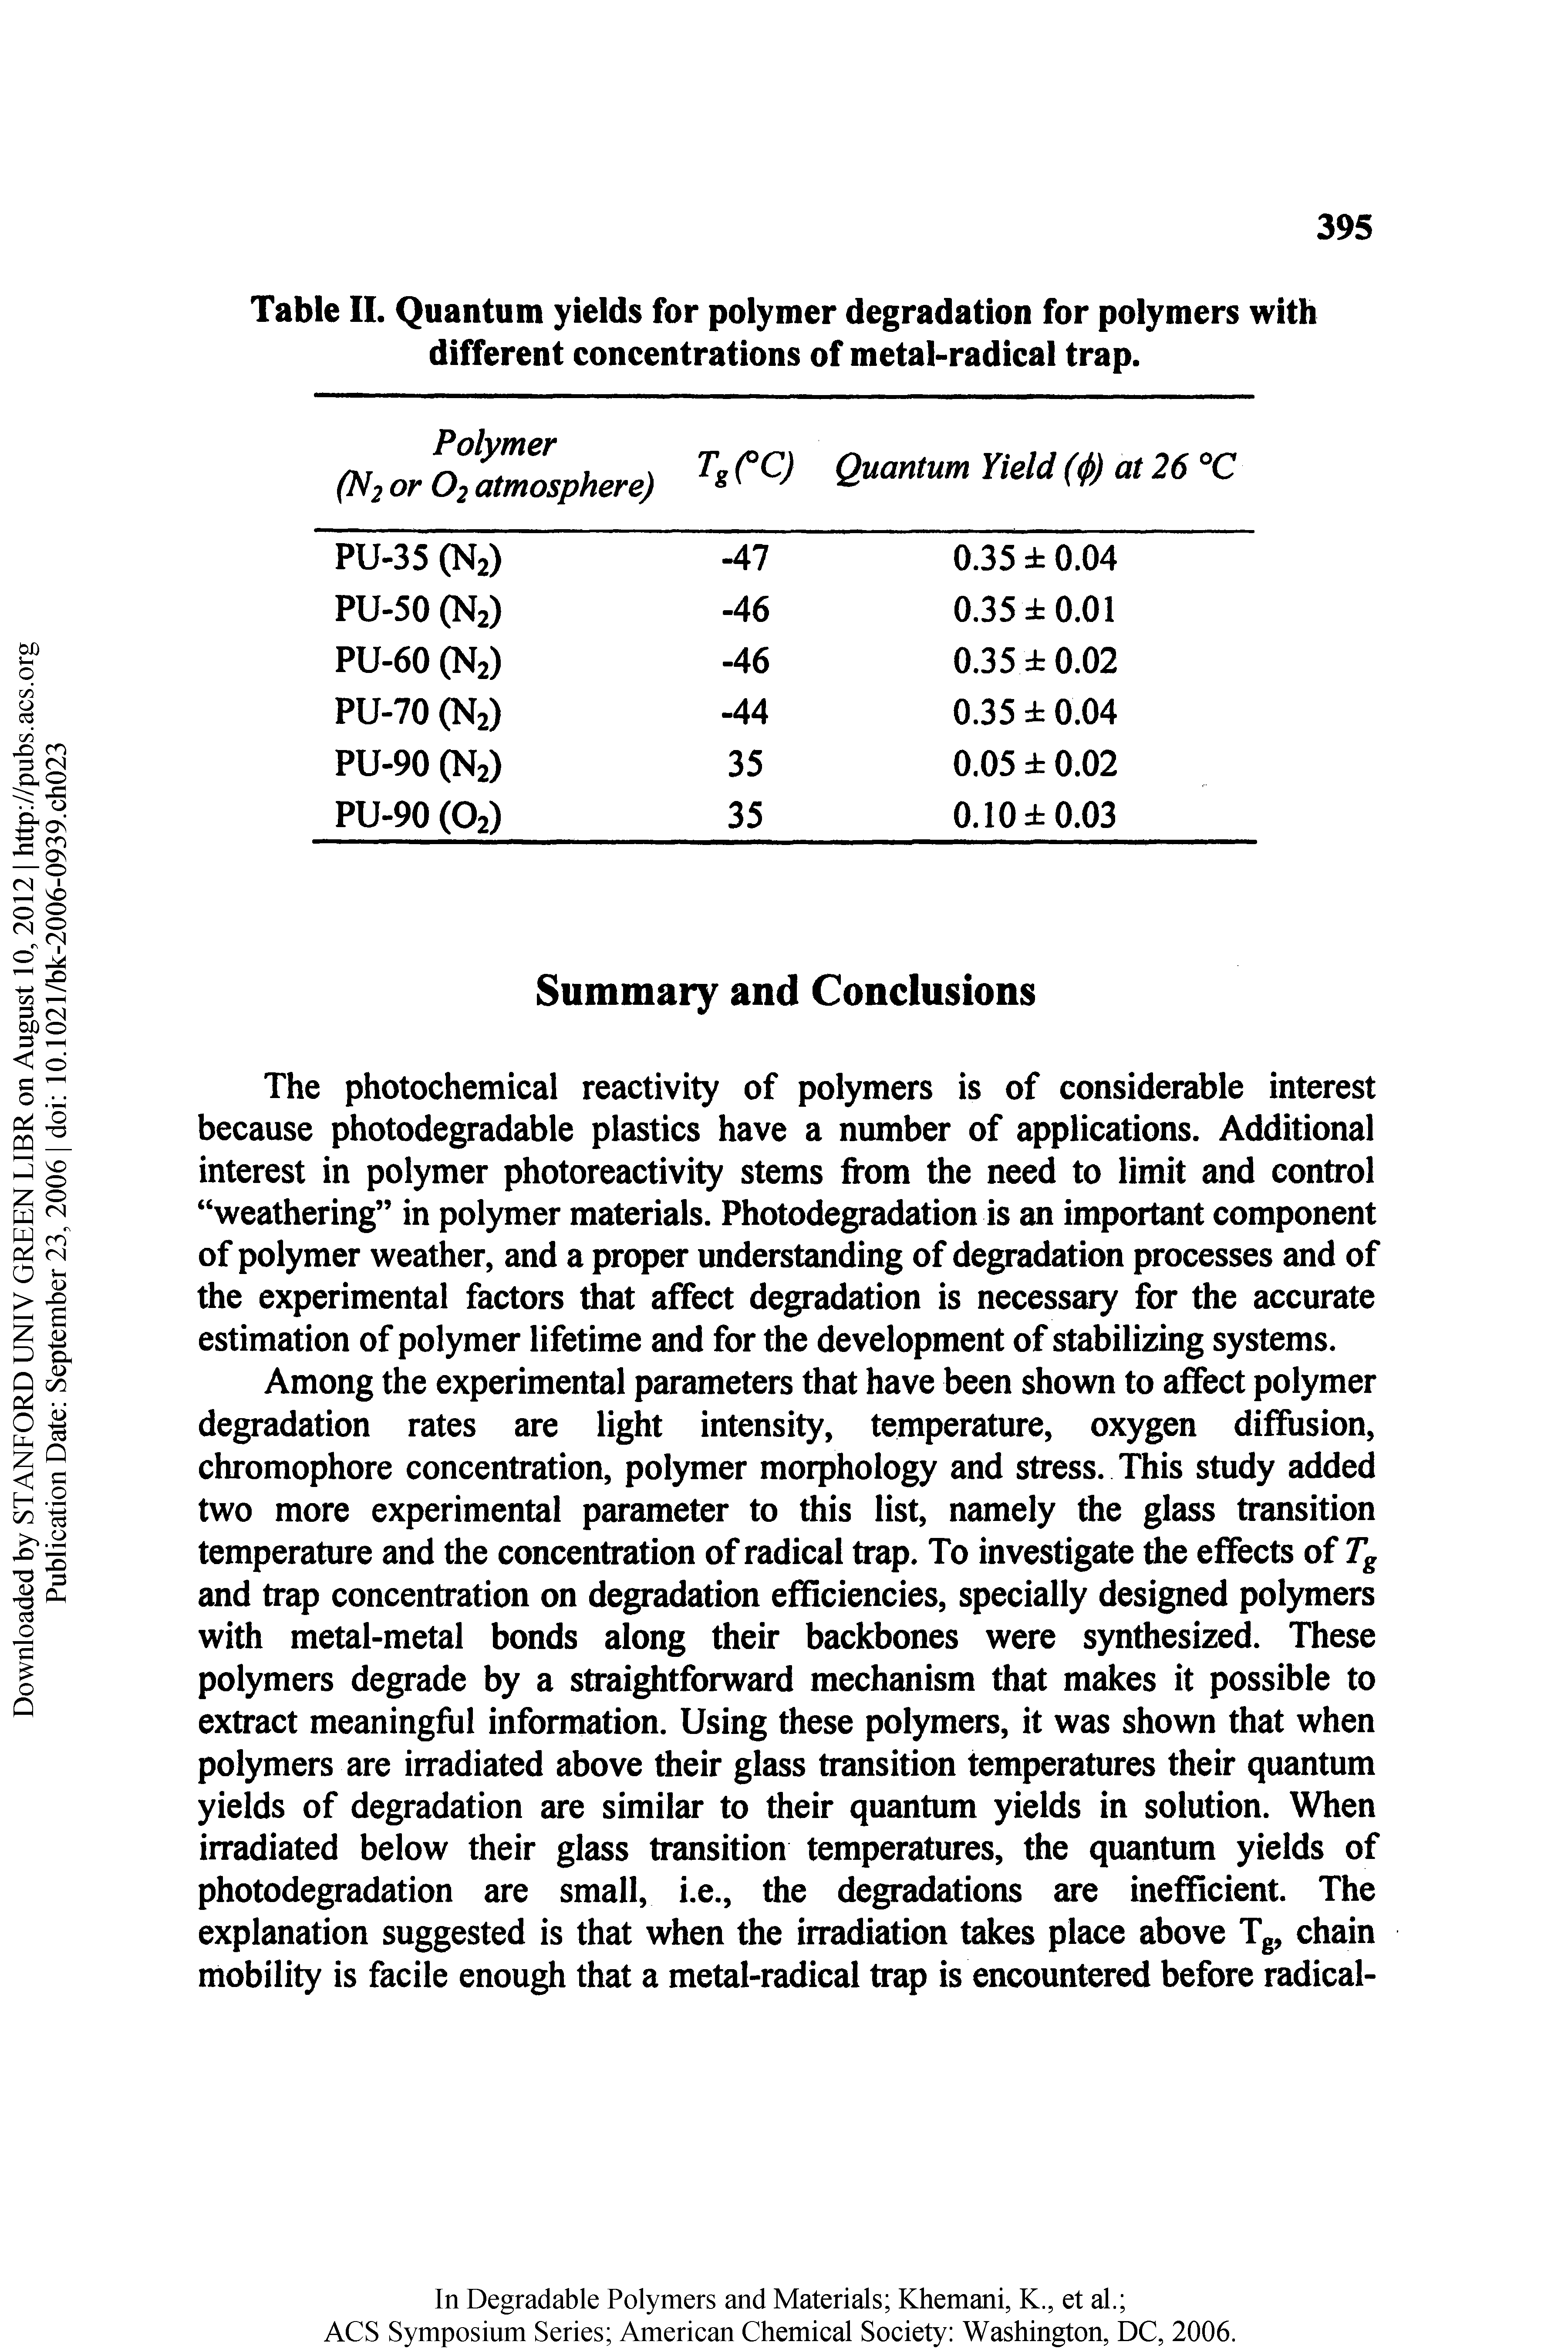 Table II. Quantum yields for polymer degradation for polymers with different concentrations of metal-radical trap.